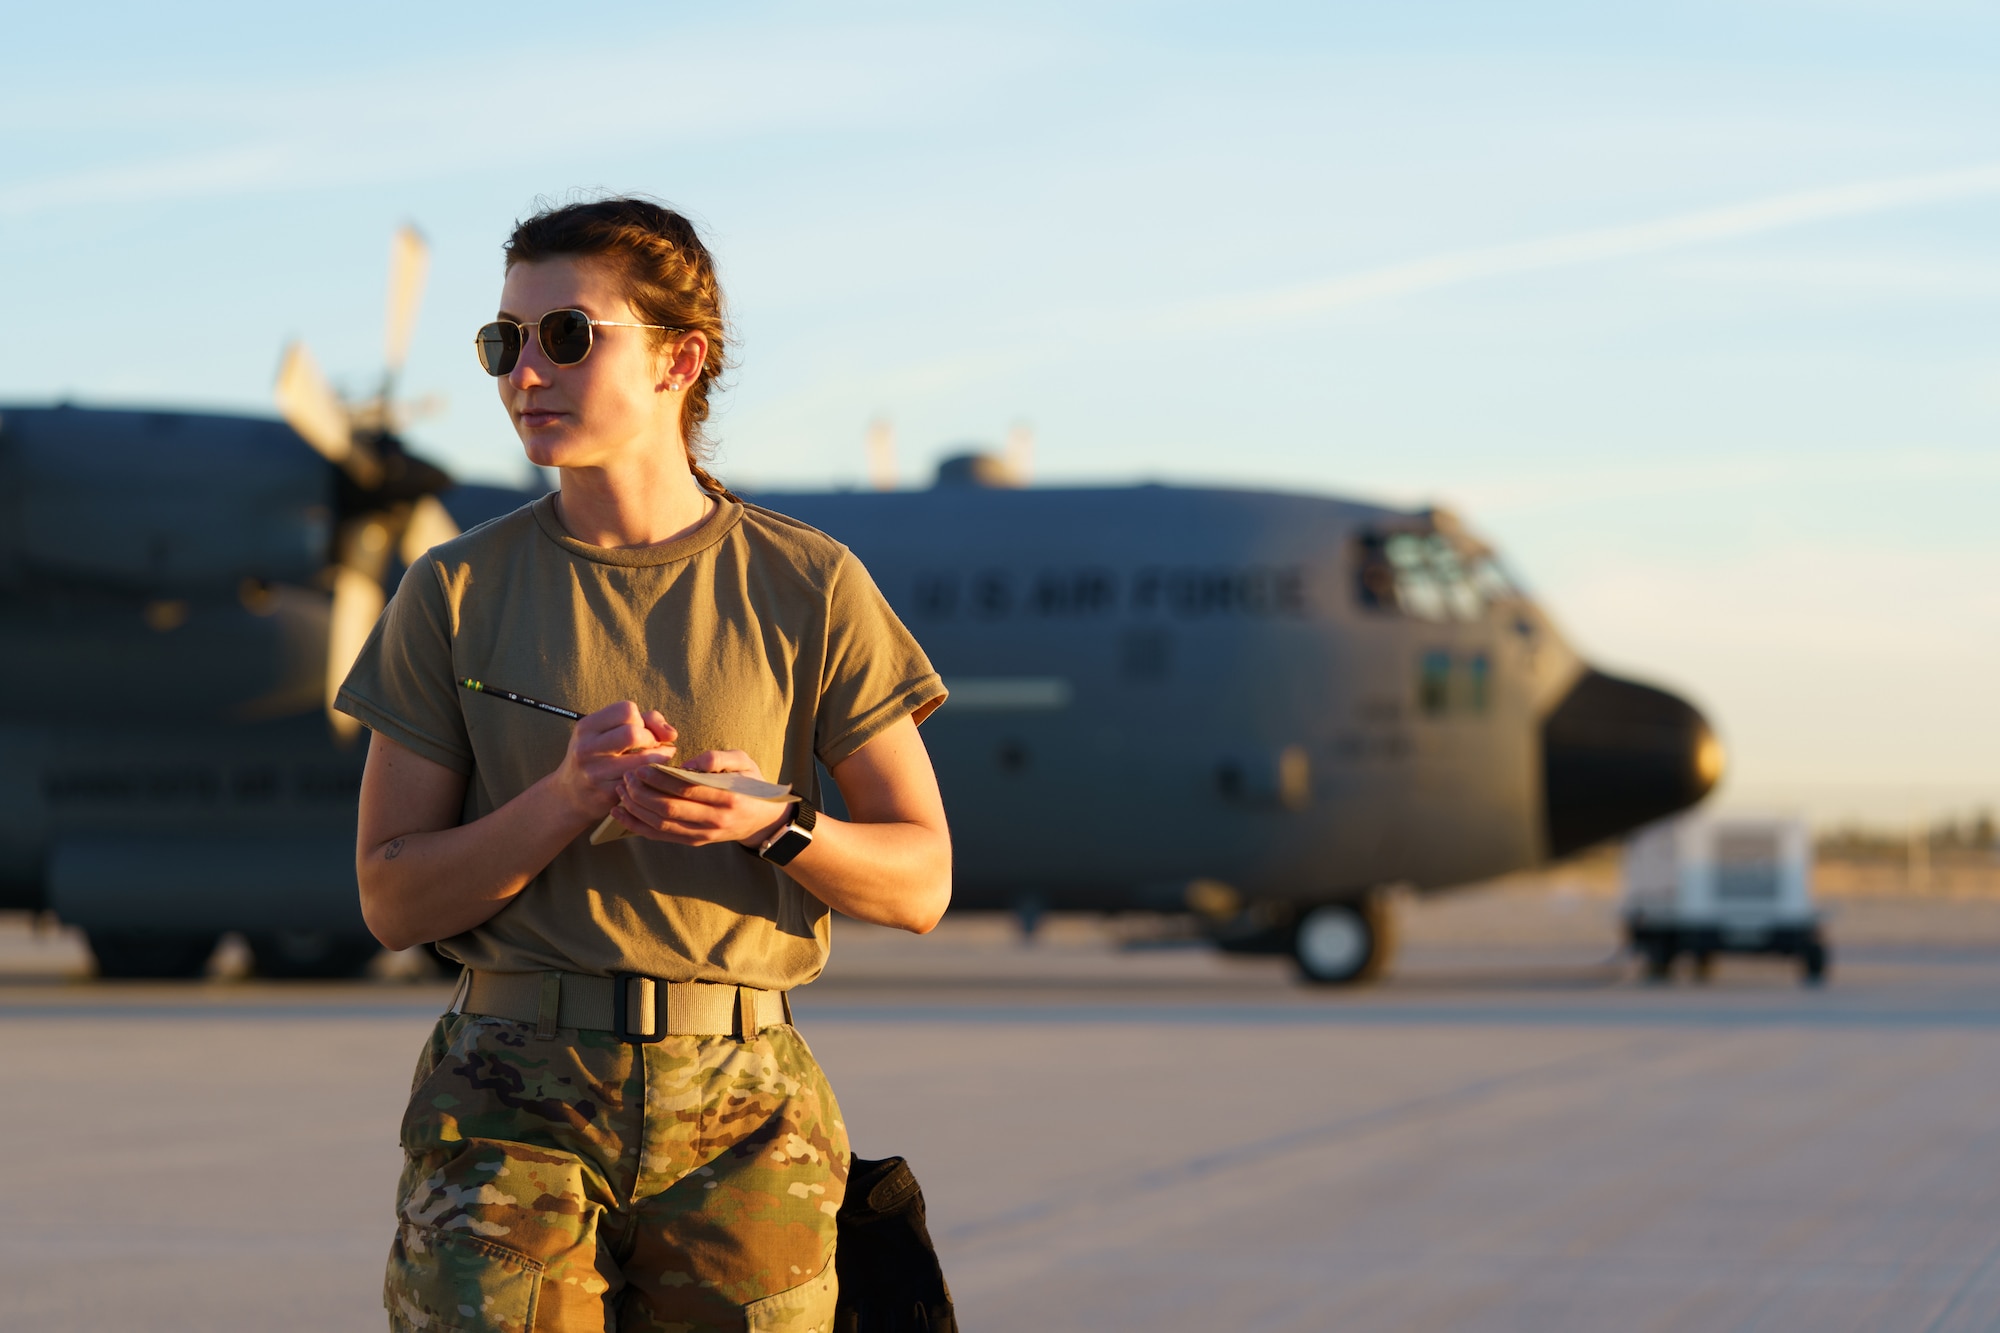 U.S. Air Force Staff Sgt. Megan Lenling, 133rd Air Transportation Function, observes flight line operations for the Air Terminal Operations Center in Yuma, Ariz., Feb. 22, 2021.